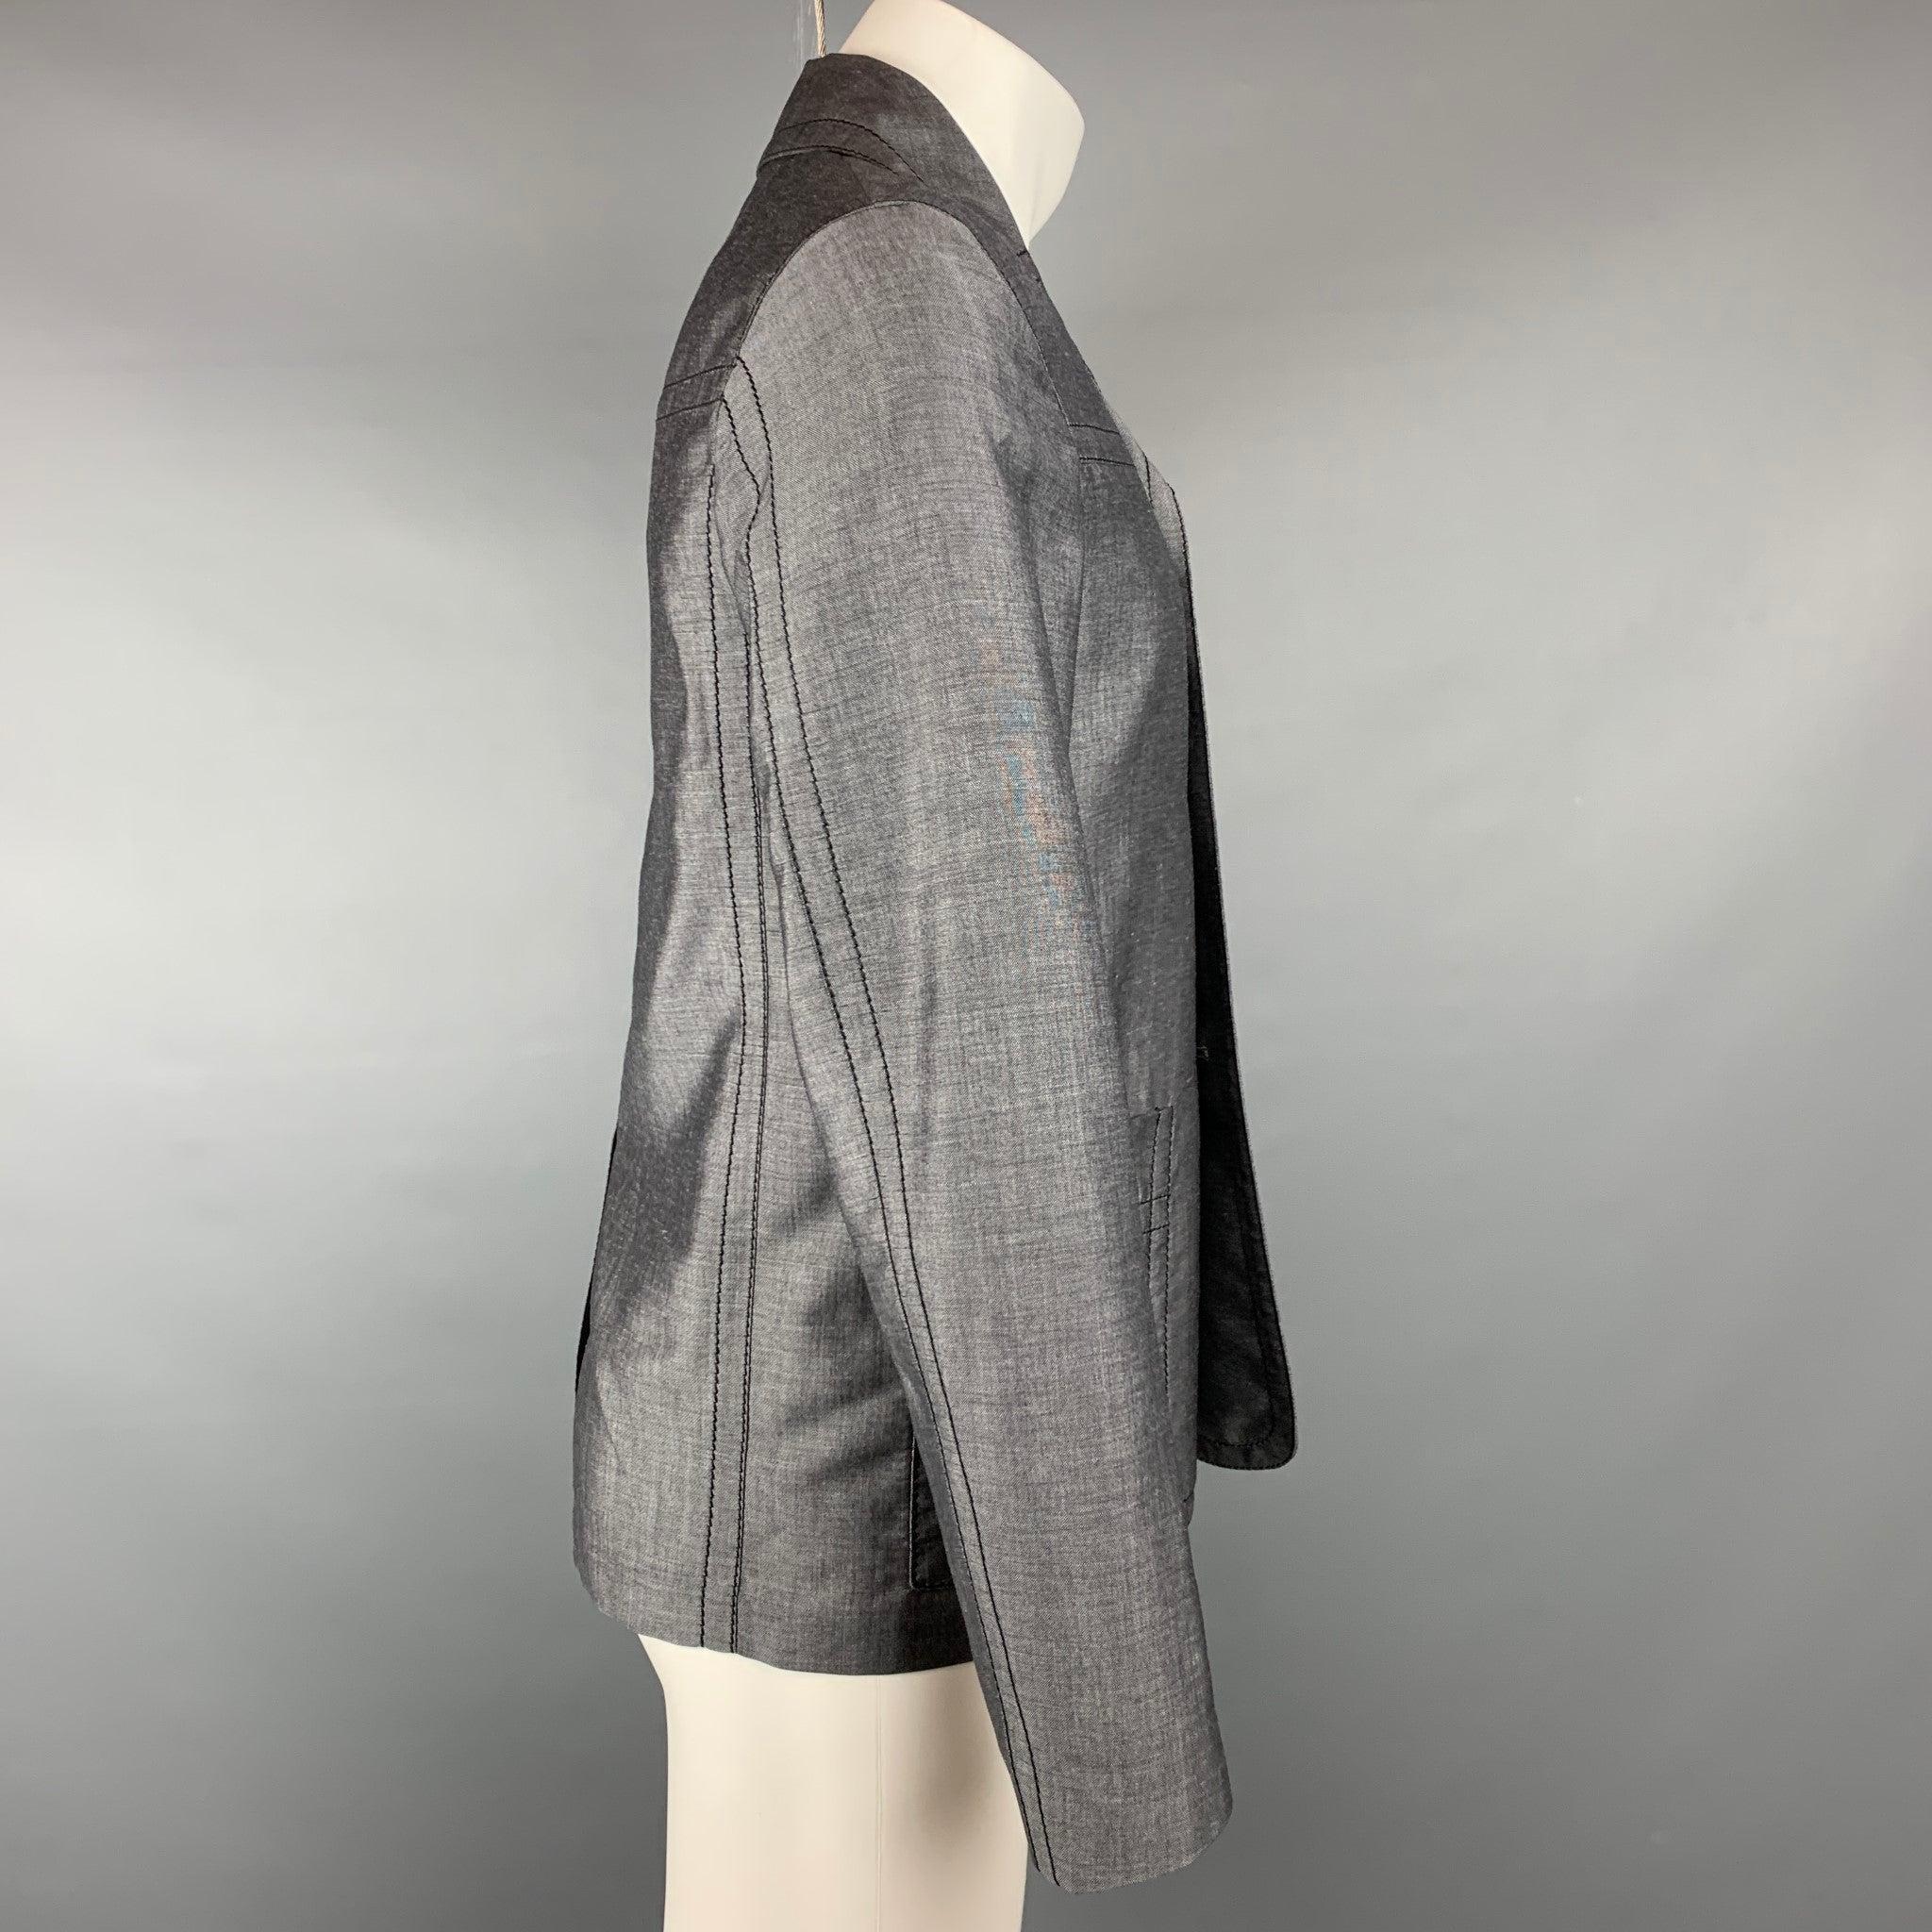 PRADA jacket comes in a dark gray mohair / wool featuring a notch lapel, contrast stitching, patch pockets, and a buttoned closure. Made in Italy.Very Good
Pre-Owned Condition. 

Marked:   IT 46 

Measurements: 
 
Shoulder: 16.5 inches  Chest: 38